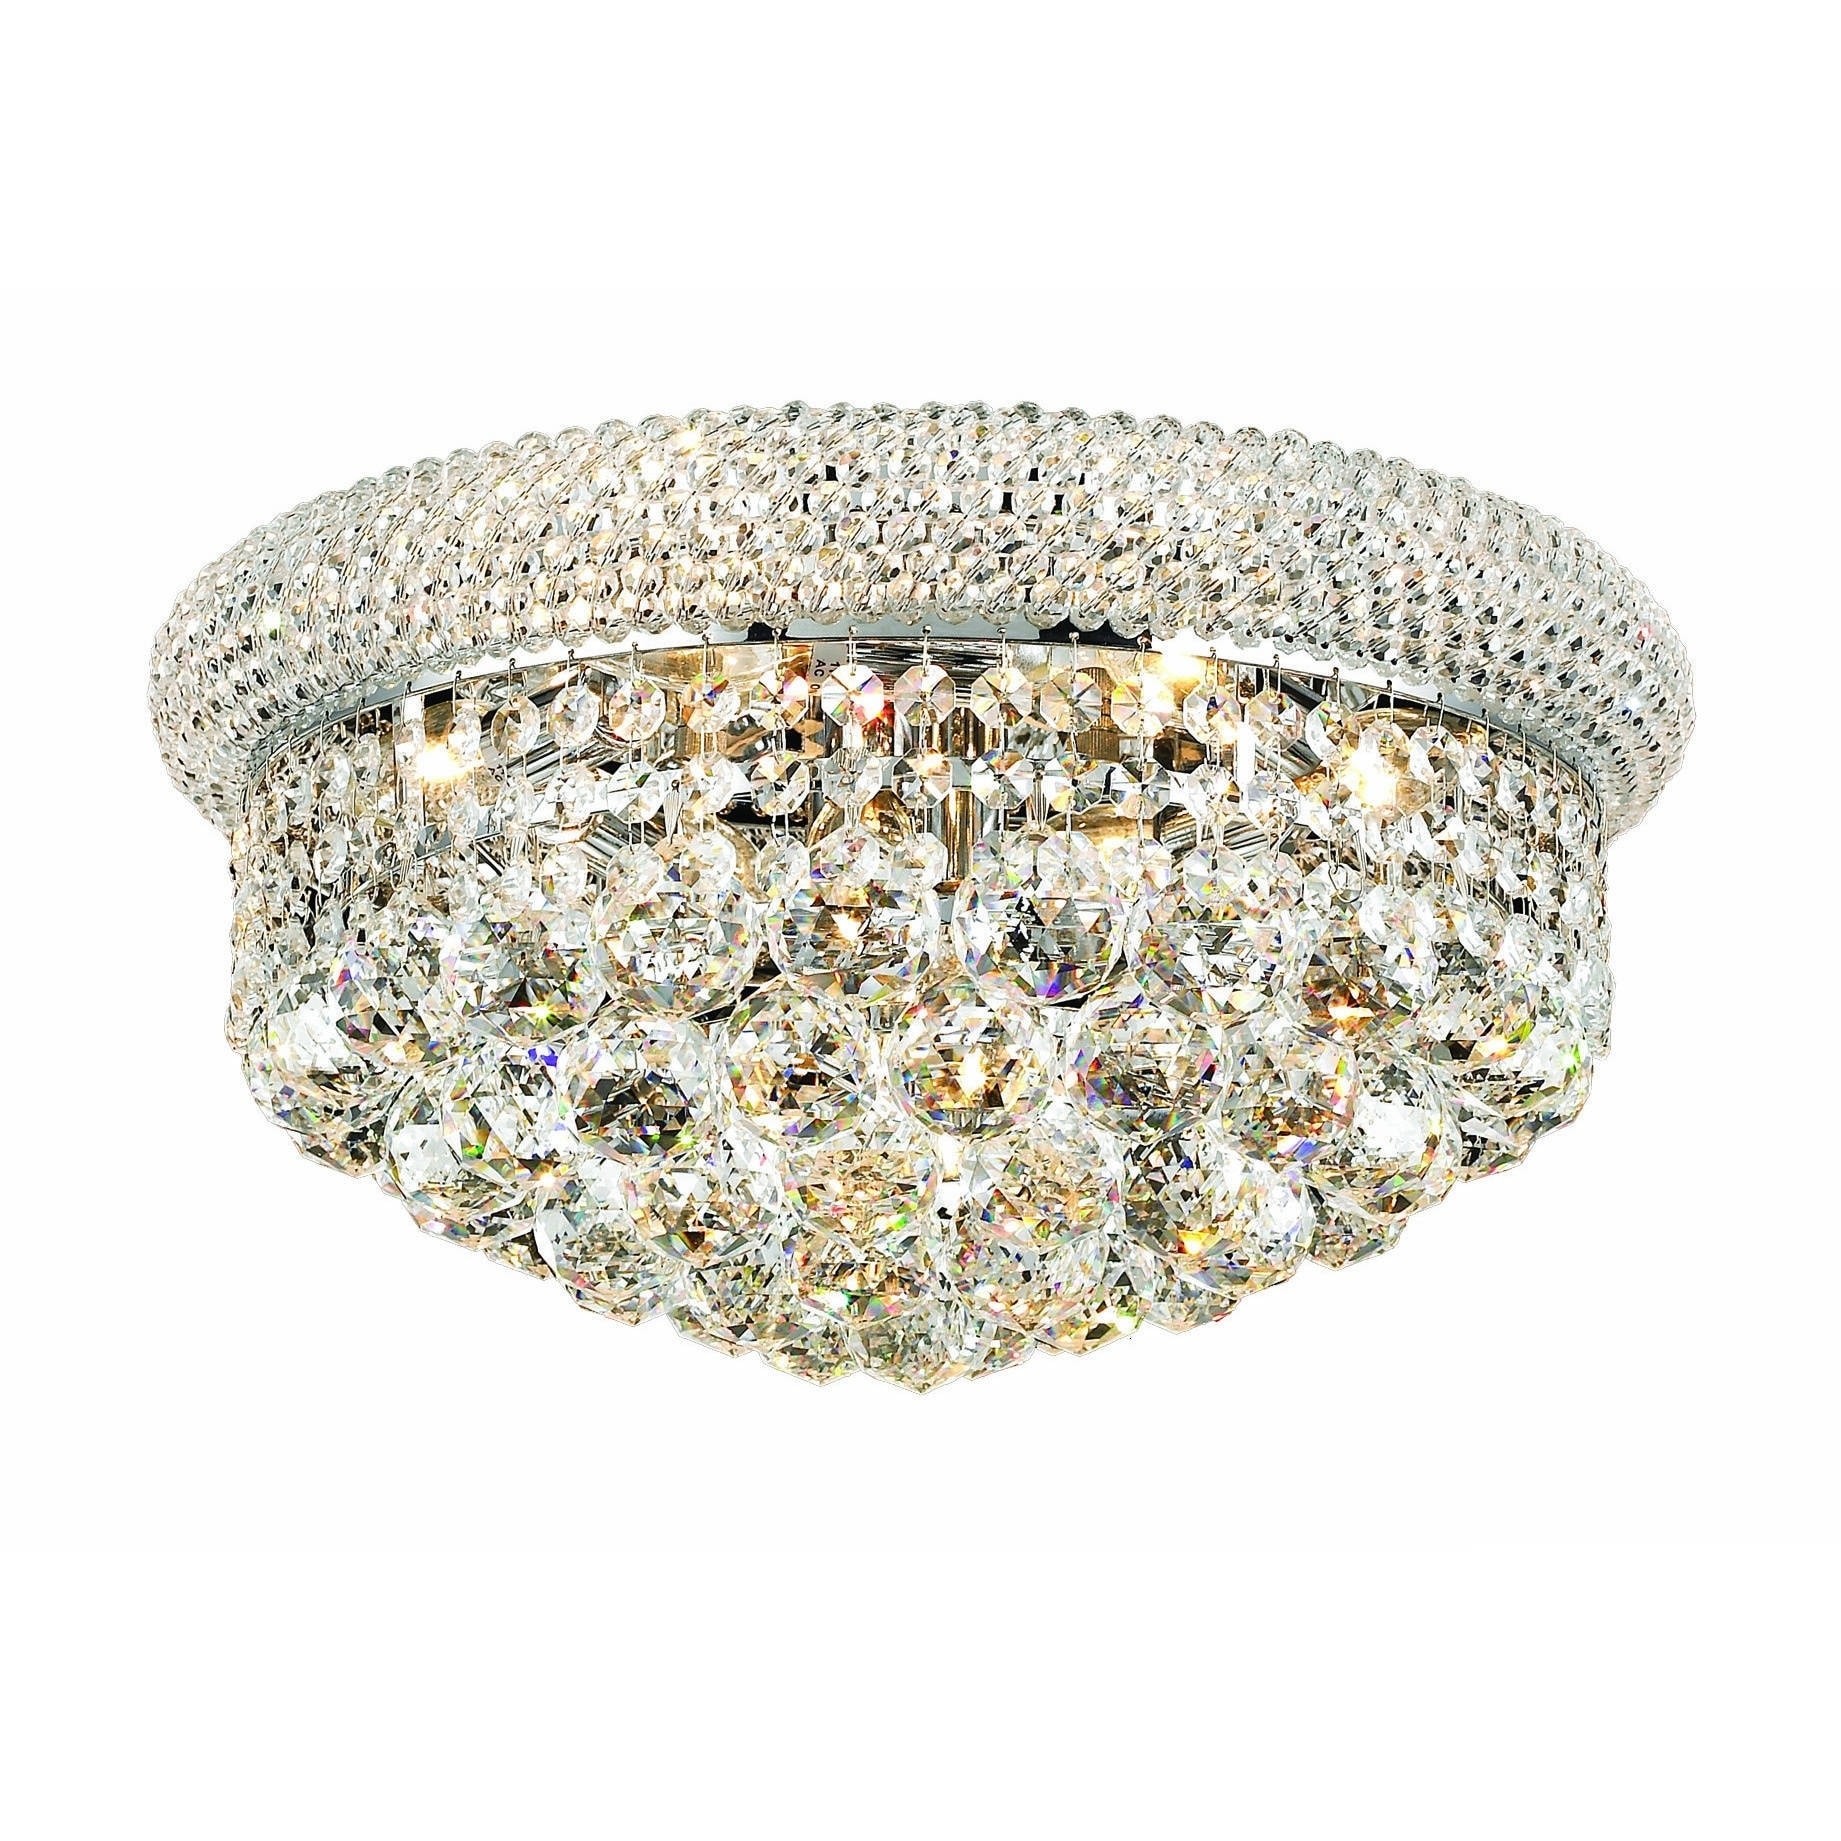 Christopher Knight Home Geneva 8 light Royal Cut Crystal And Chrome Flush Mount (Crystal and AluminumFinish ChromeNumber of lights Eight (8)Requires eight (8) 60 watt max bulb (not included)Bulb type E12, 110 Volt 125 VoltDimensions 16 inches long x 1